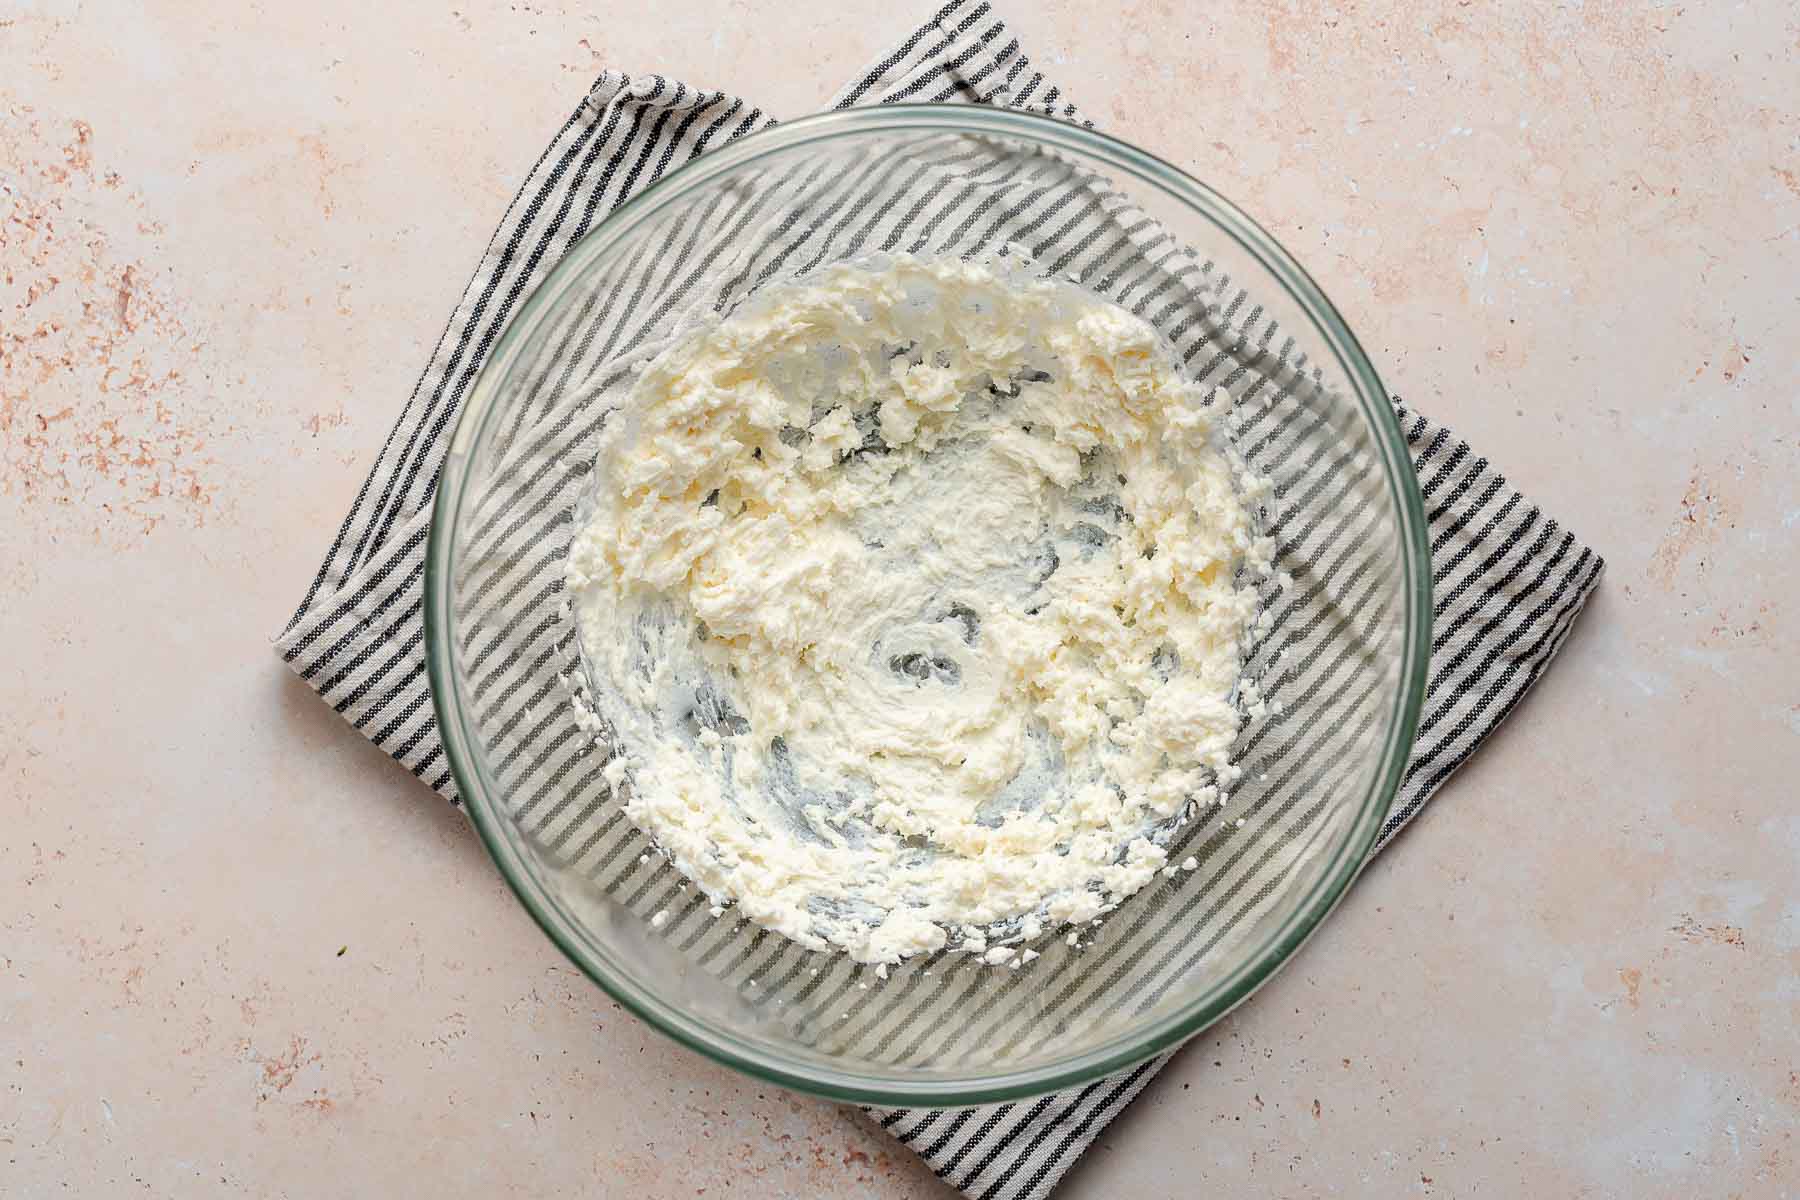 Beat butter and ricotta in a bowl.